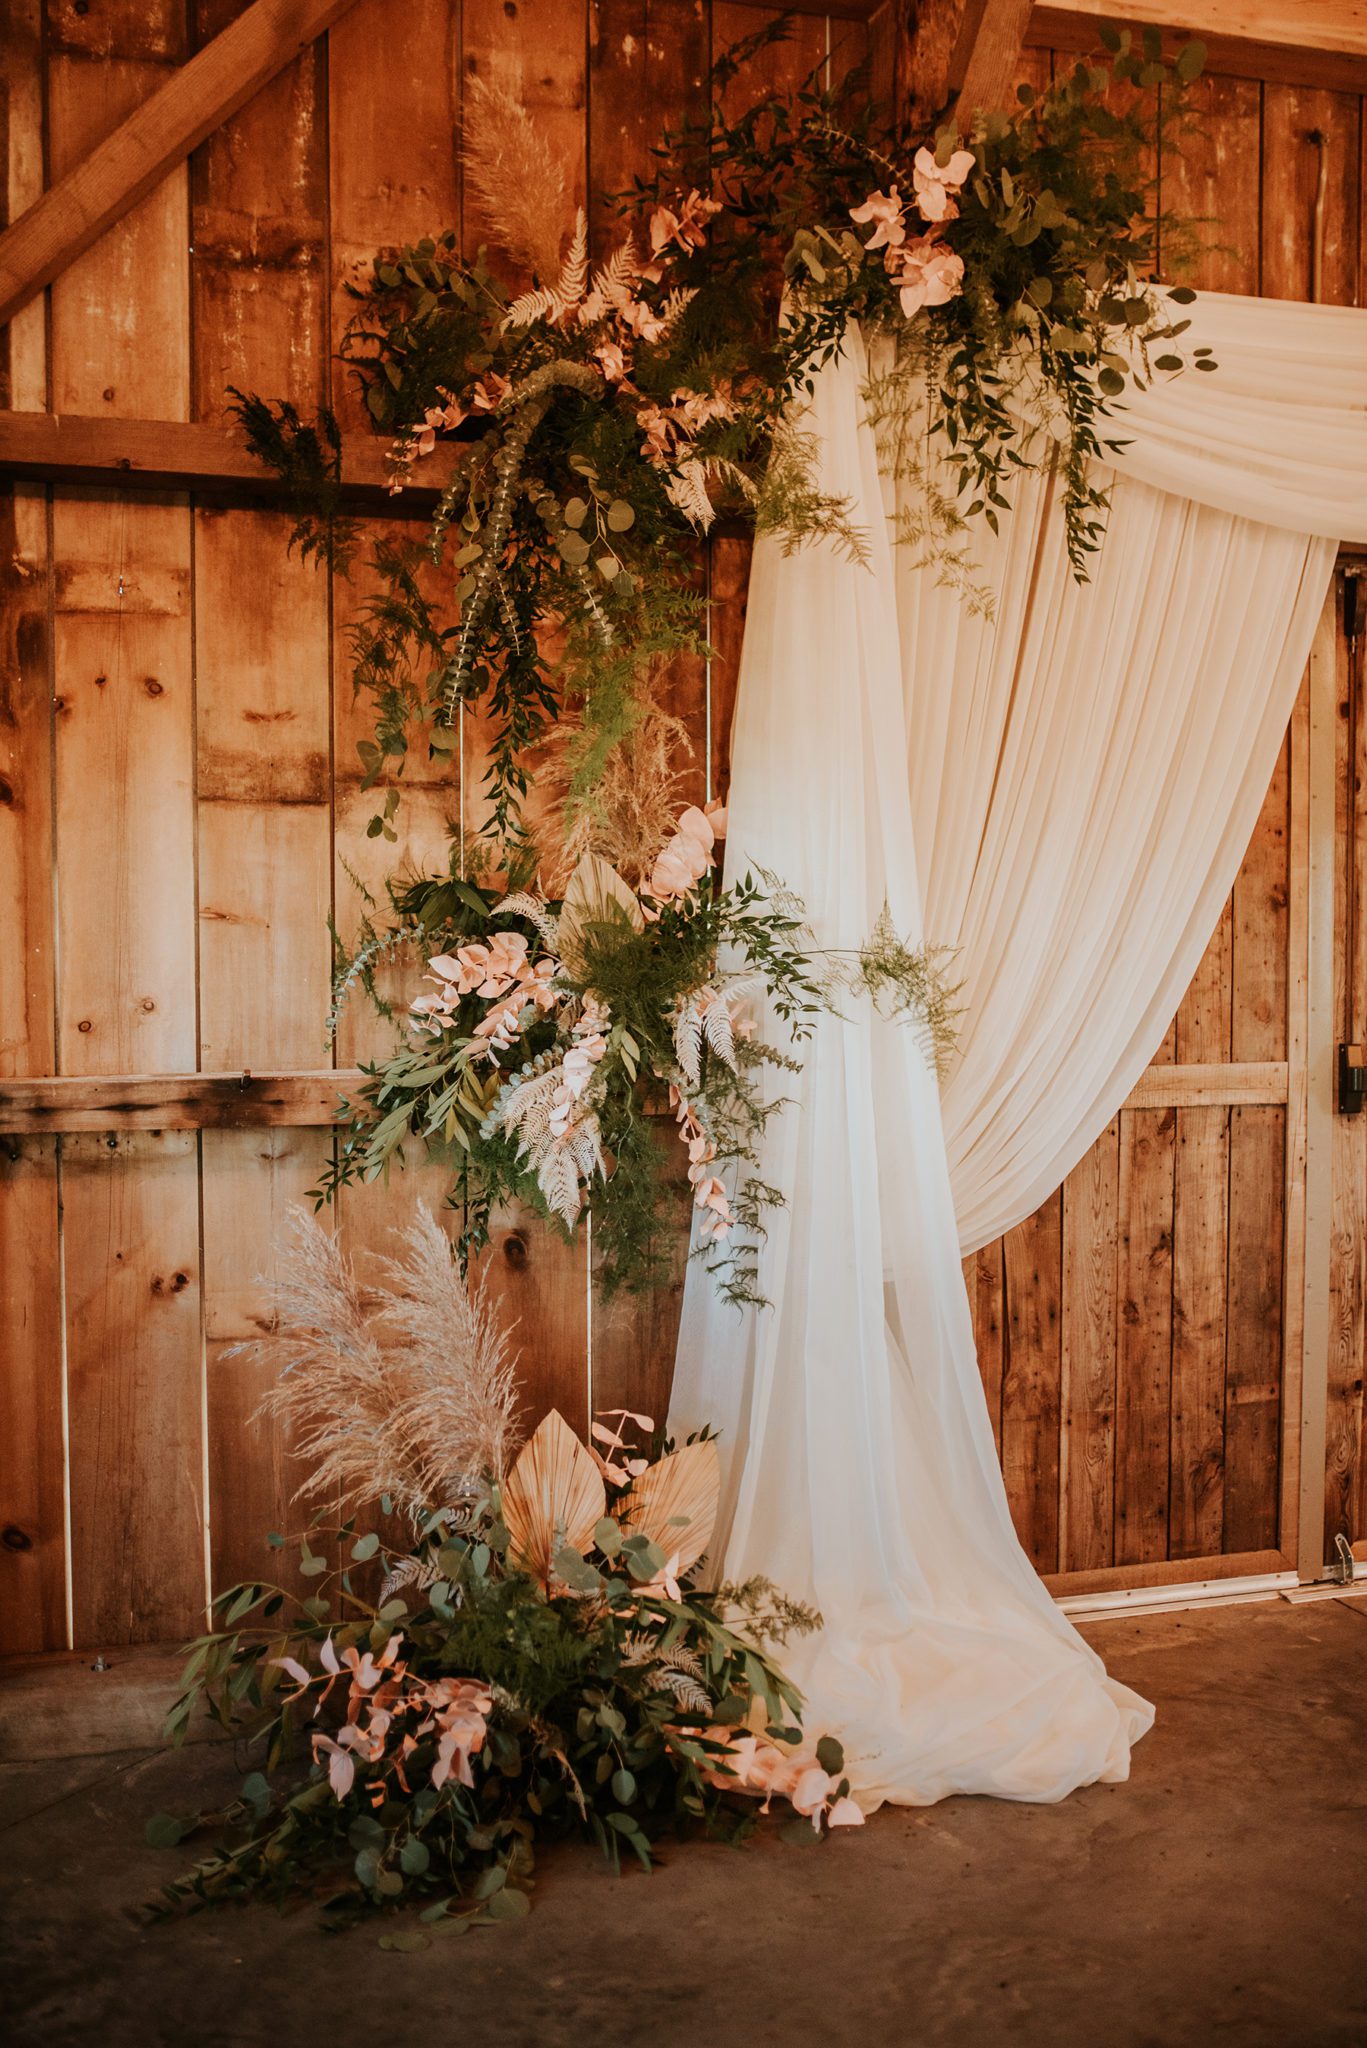 Western wedding decor inspiration for a boho bride with florals and drapery